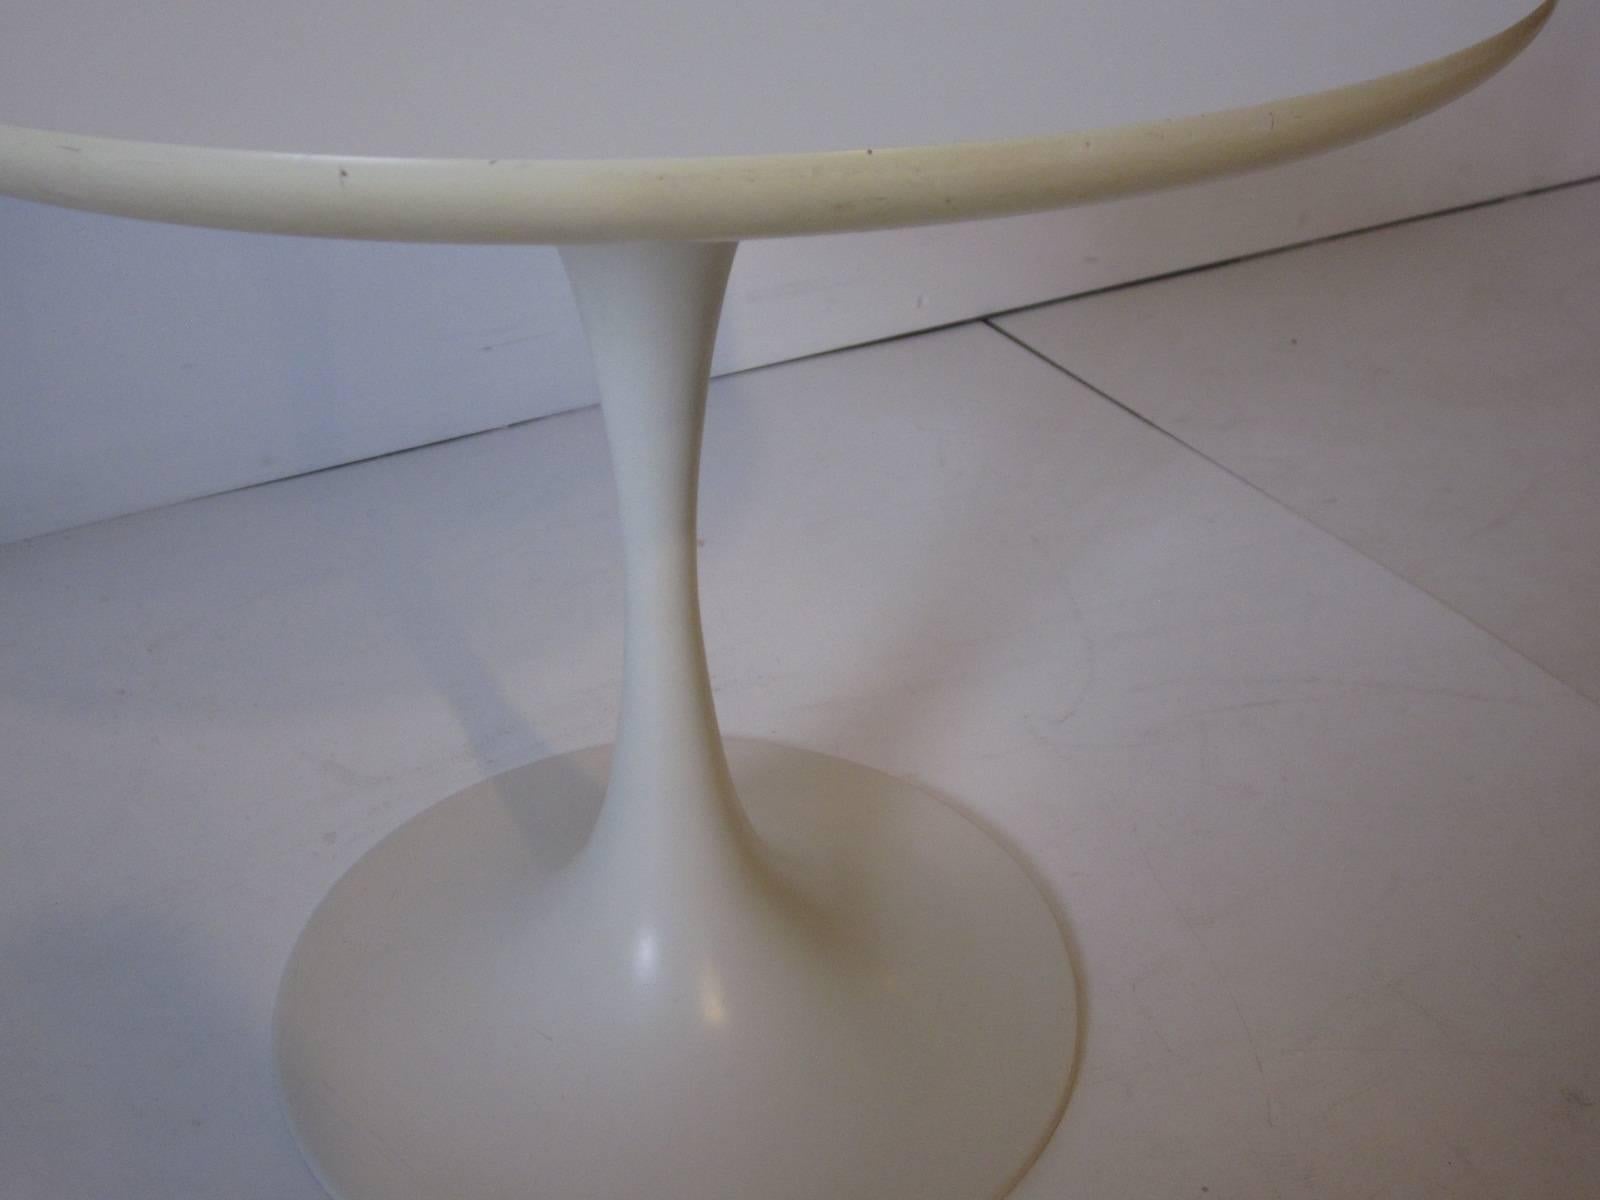 A Knoll styled white tulip side table with laminate top and sculptural steel base in a satin finish. Designed in the manner of Eero Saarinen and manufactured by the Burke Furniture Company.